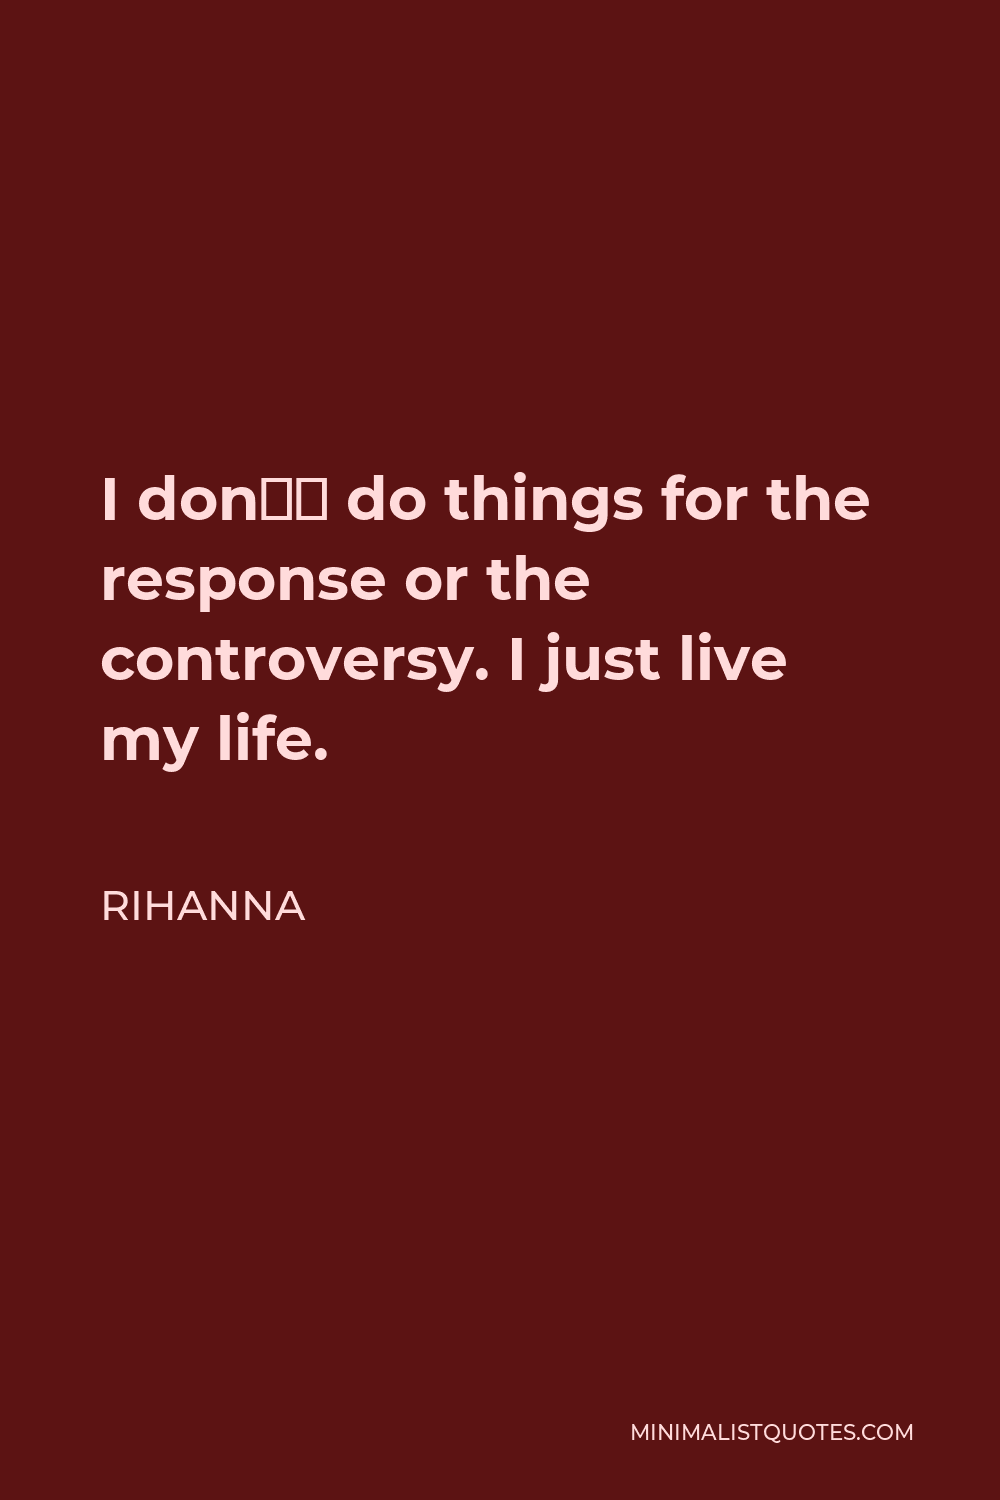 Rihanna Quote - I don’t do things for the response or the controversy. I just live my life.